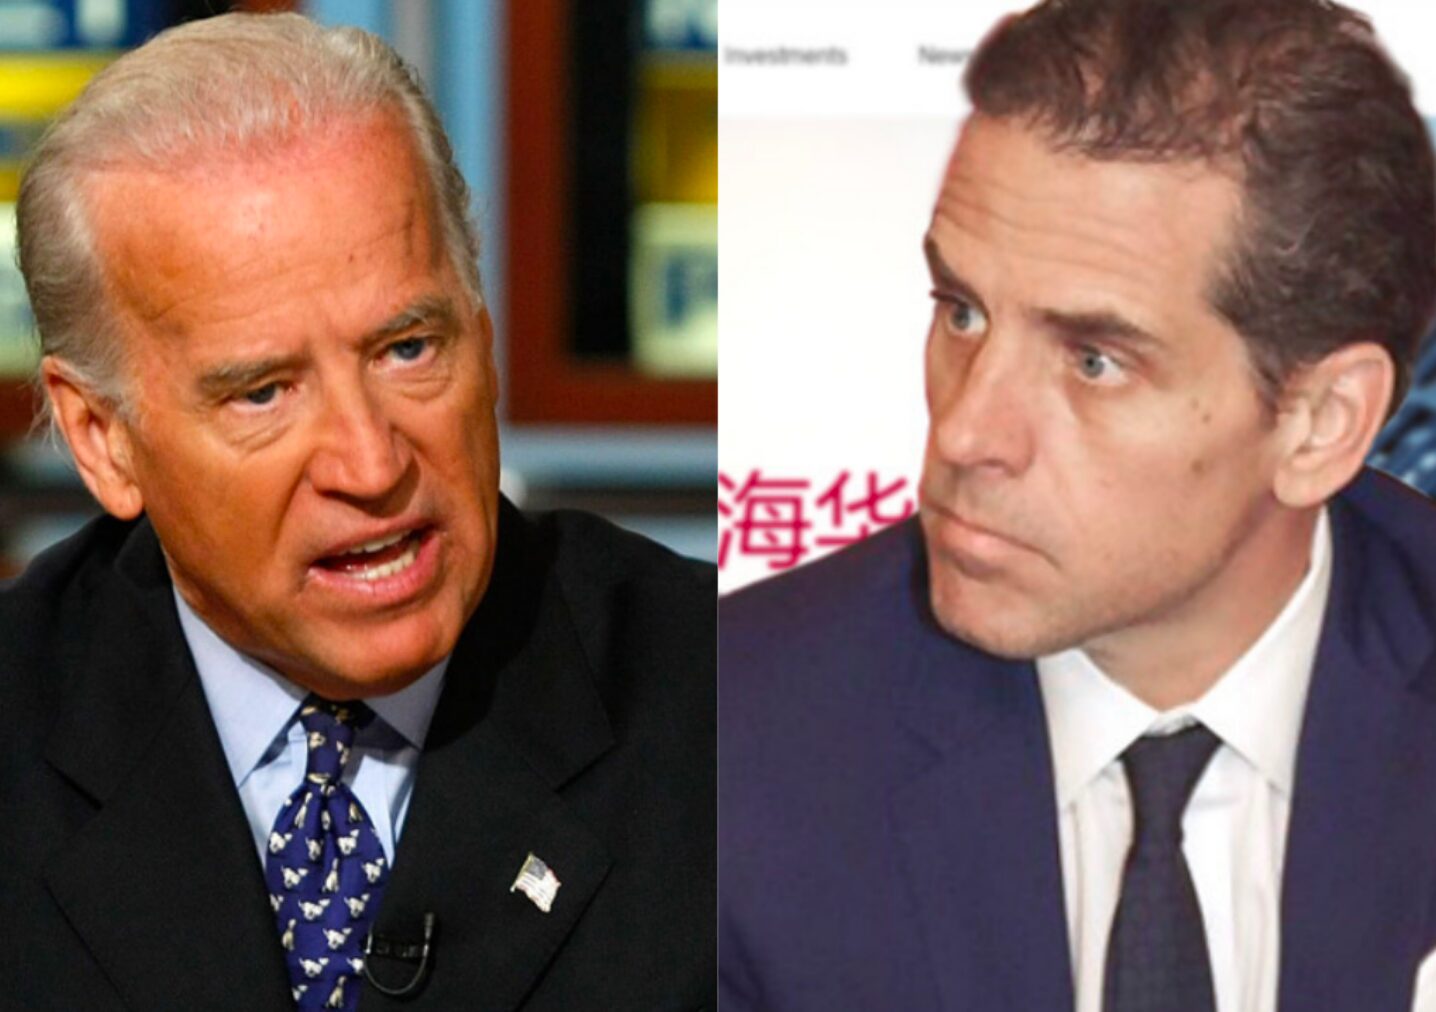 Will anyone face any consequences for gaslighting Americans on the Hunter Biden story?